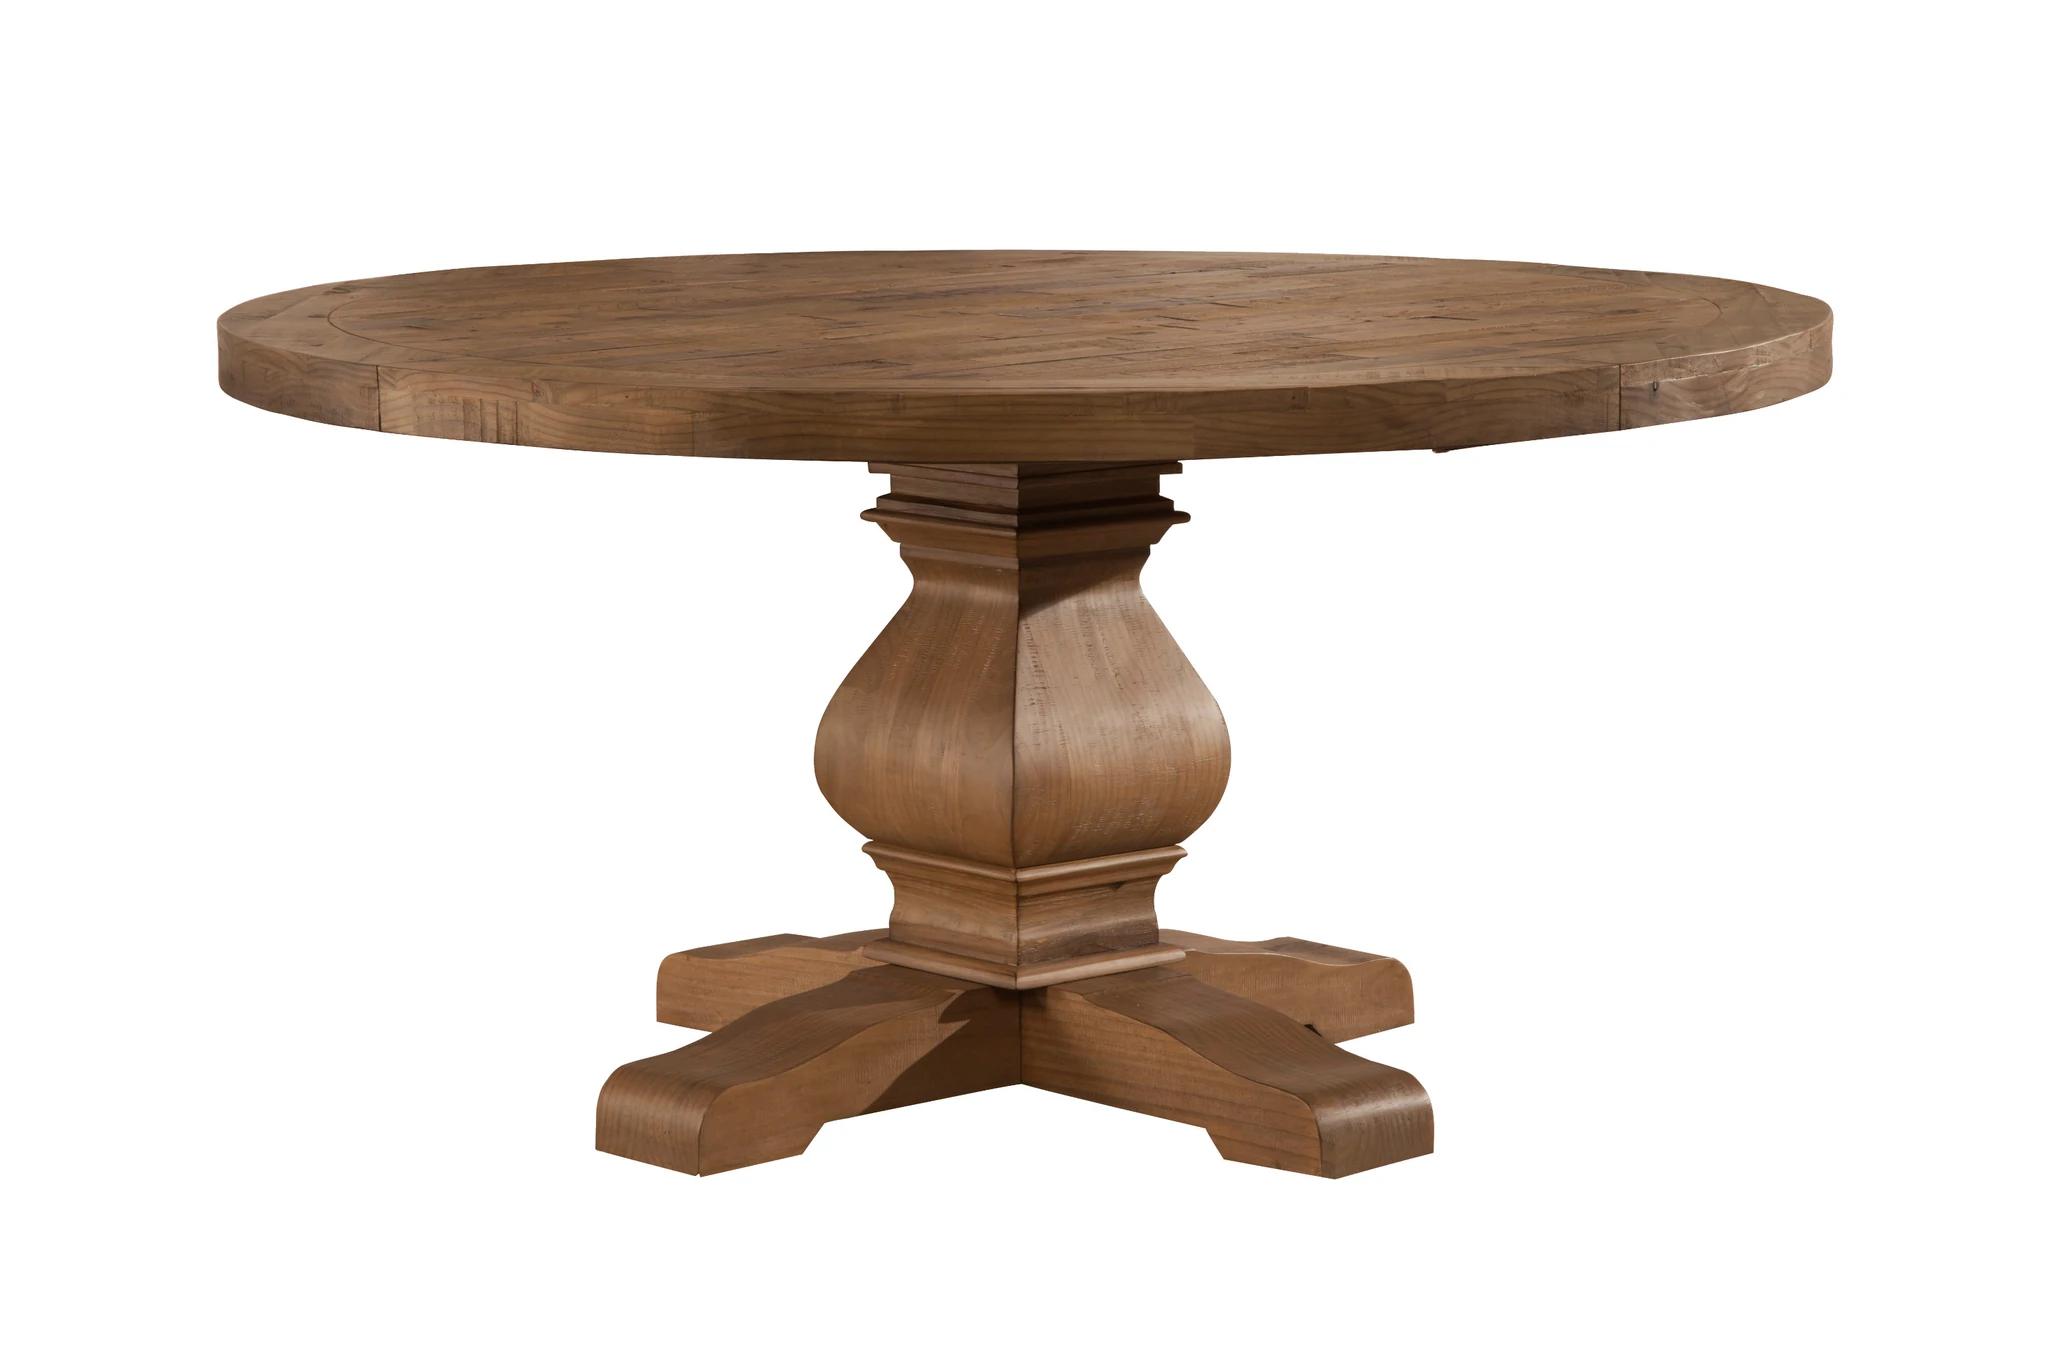 Contemporary, Rustic Dining Table KENSINGTON 2668-25 in Natural 